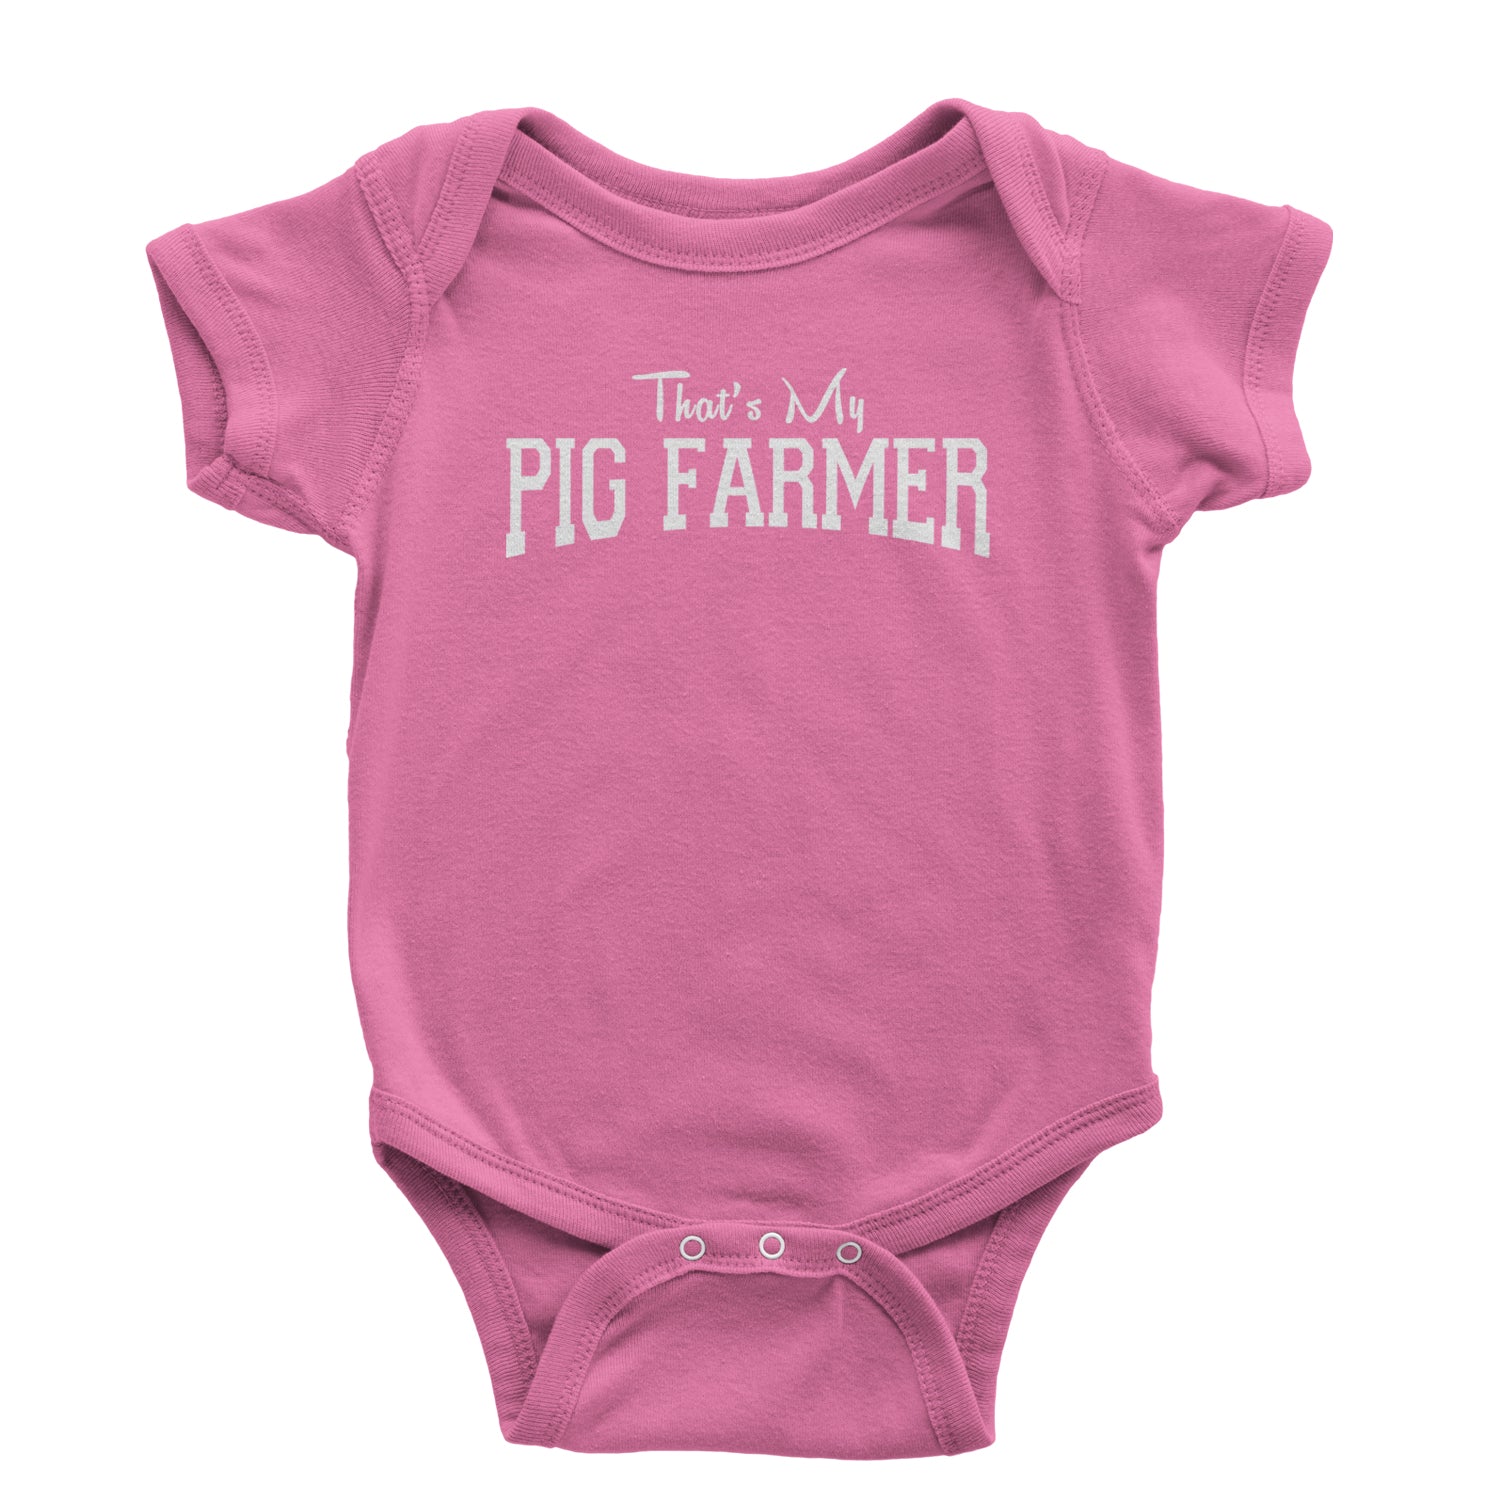 That's My Pig Farmer Utah Football Infant One-Piece Romper Bodysuit and Toddler T-shirt